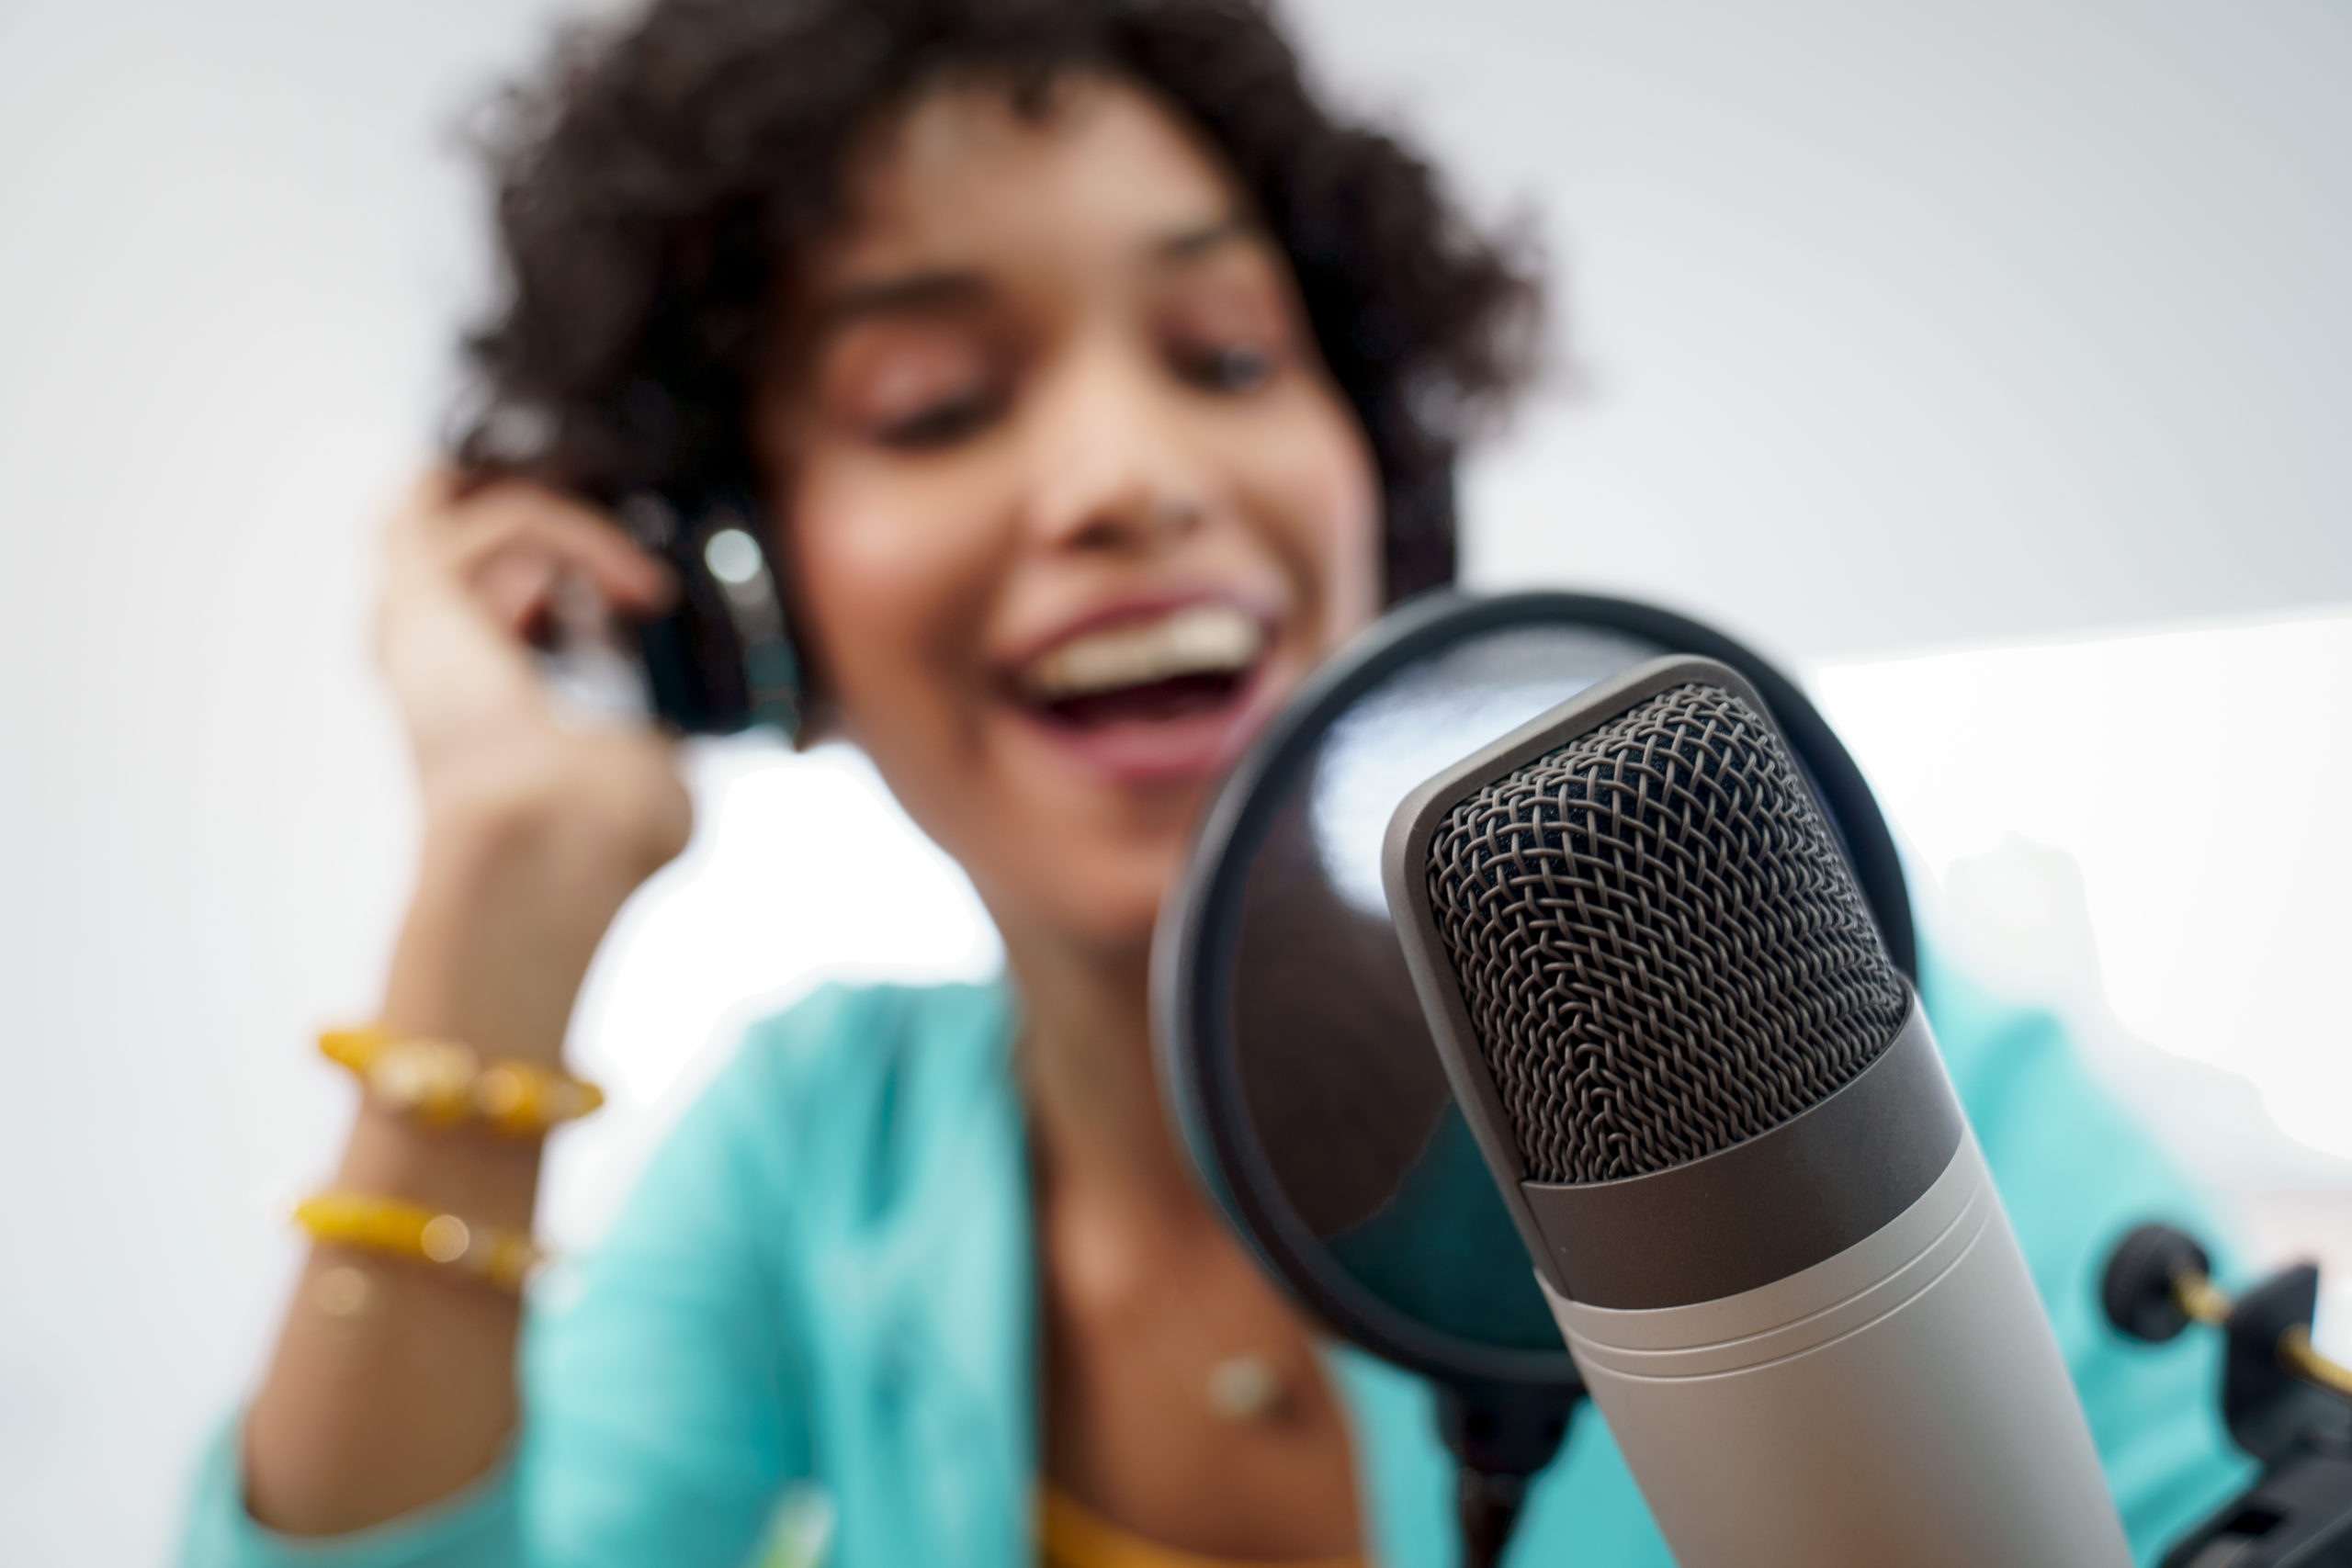 Good looking young black female making an online podcast recording for her online show. Attractive millennial African American business woman using headphones in front of microphone for radio program.